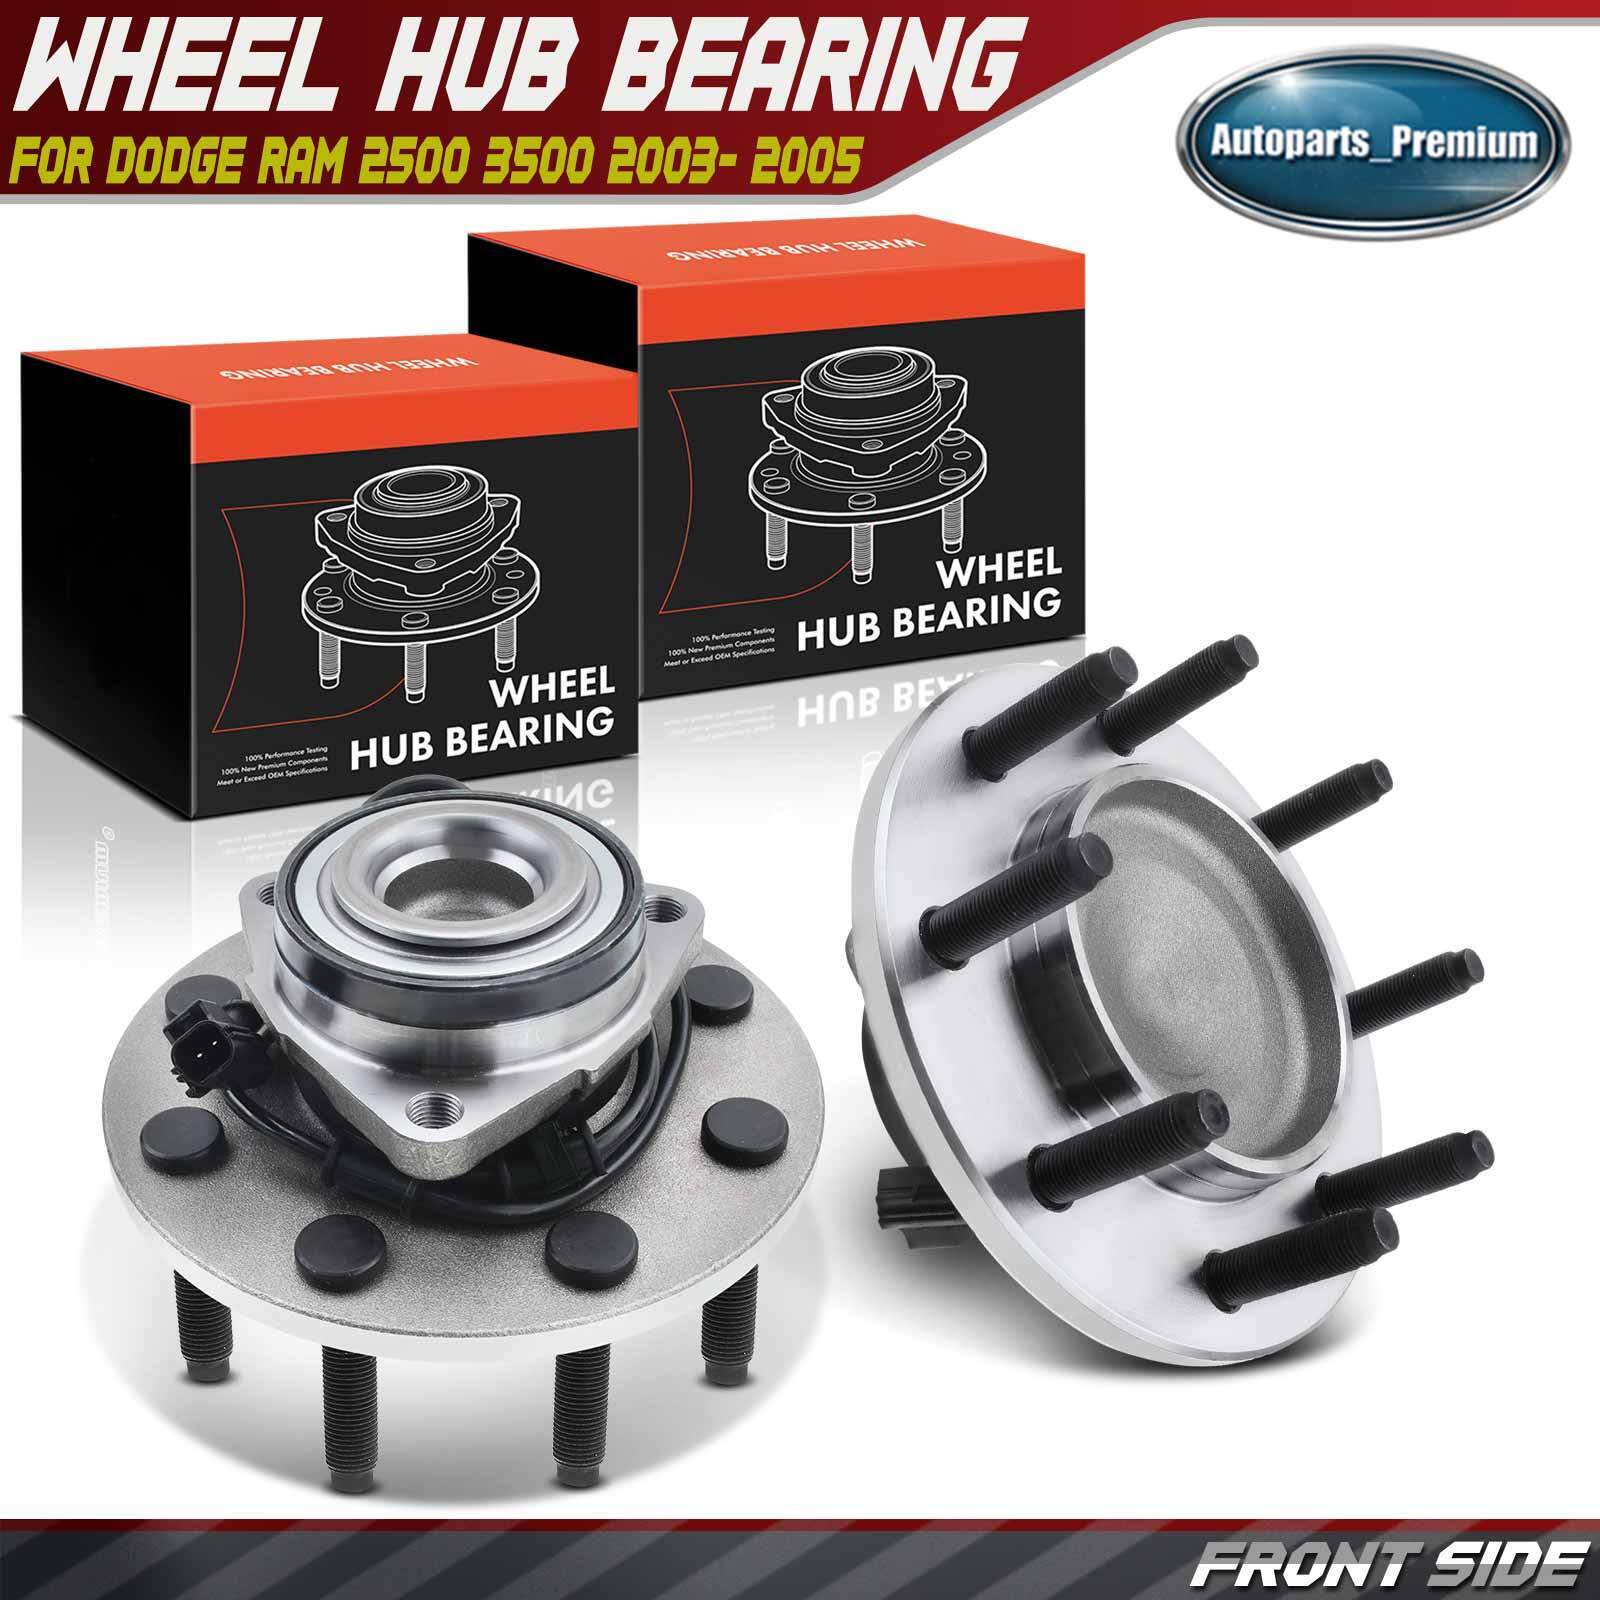 2 x Front Left Right Wheel Hub Bearings for Dodge Ram 2500 3500 2003-2008 w/ ABS